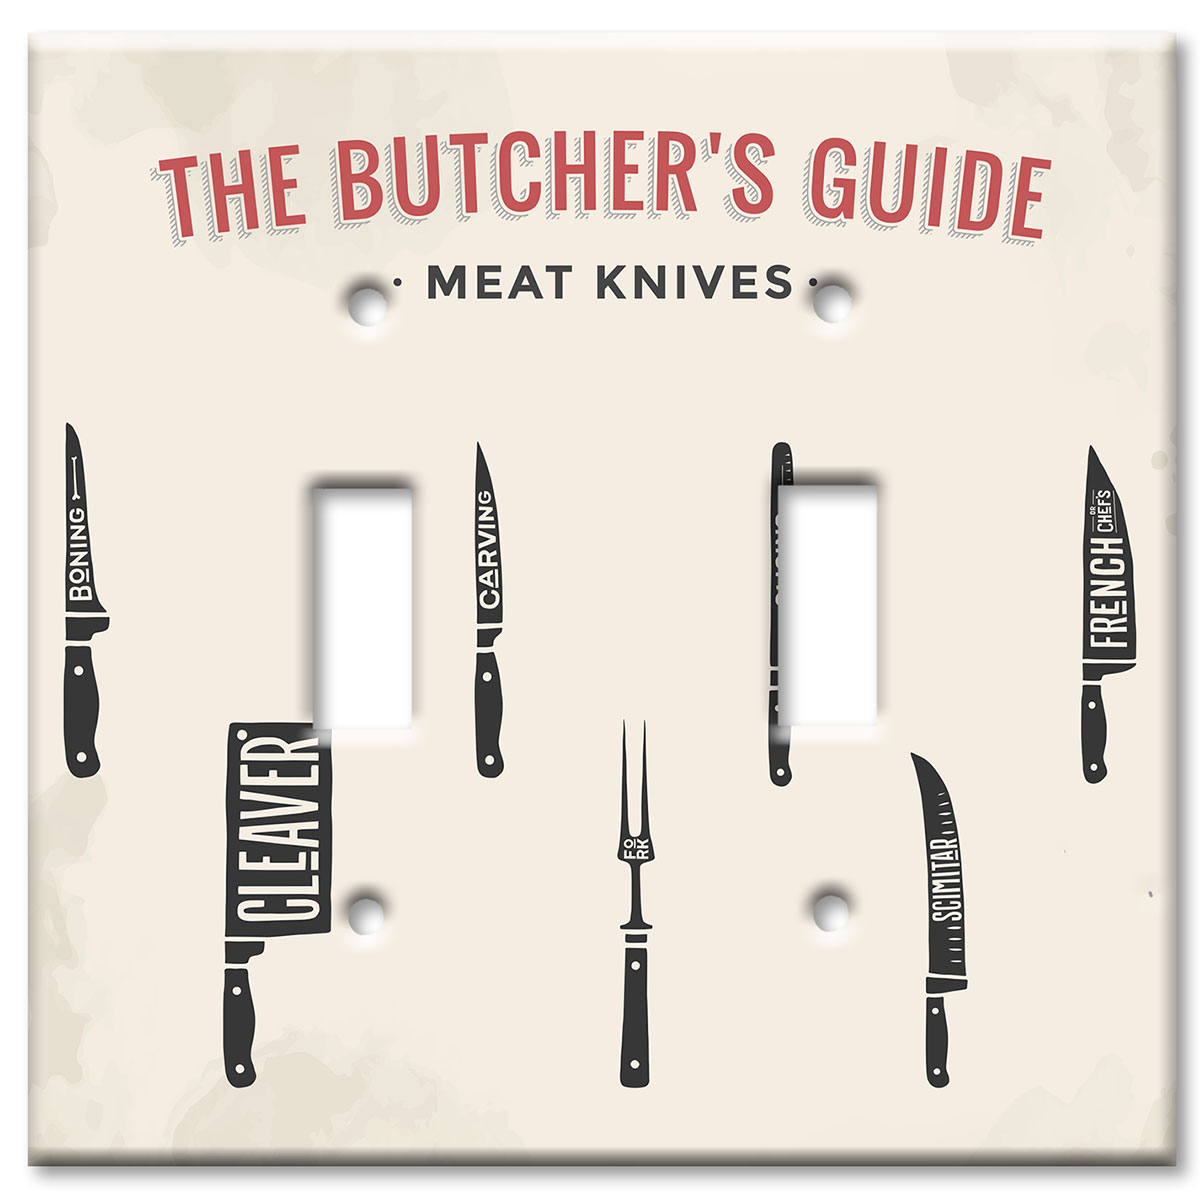 Art Plates - Decorative OVERSIZED Wall Plates & Outlet Covers - Butcher's Guide